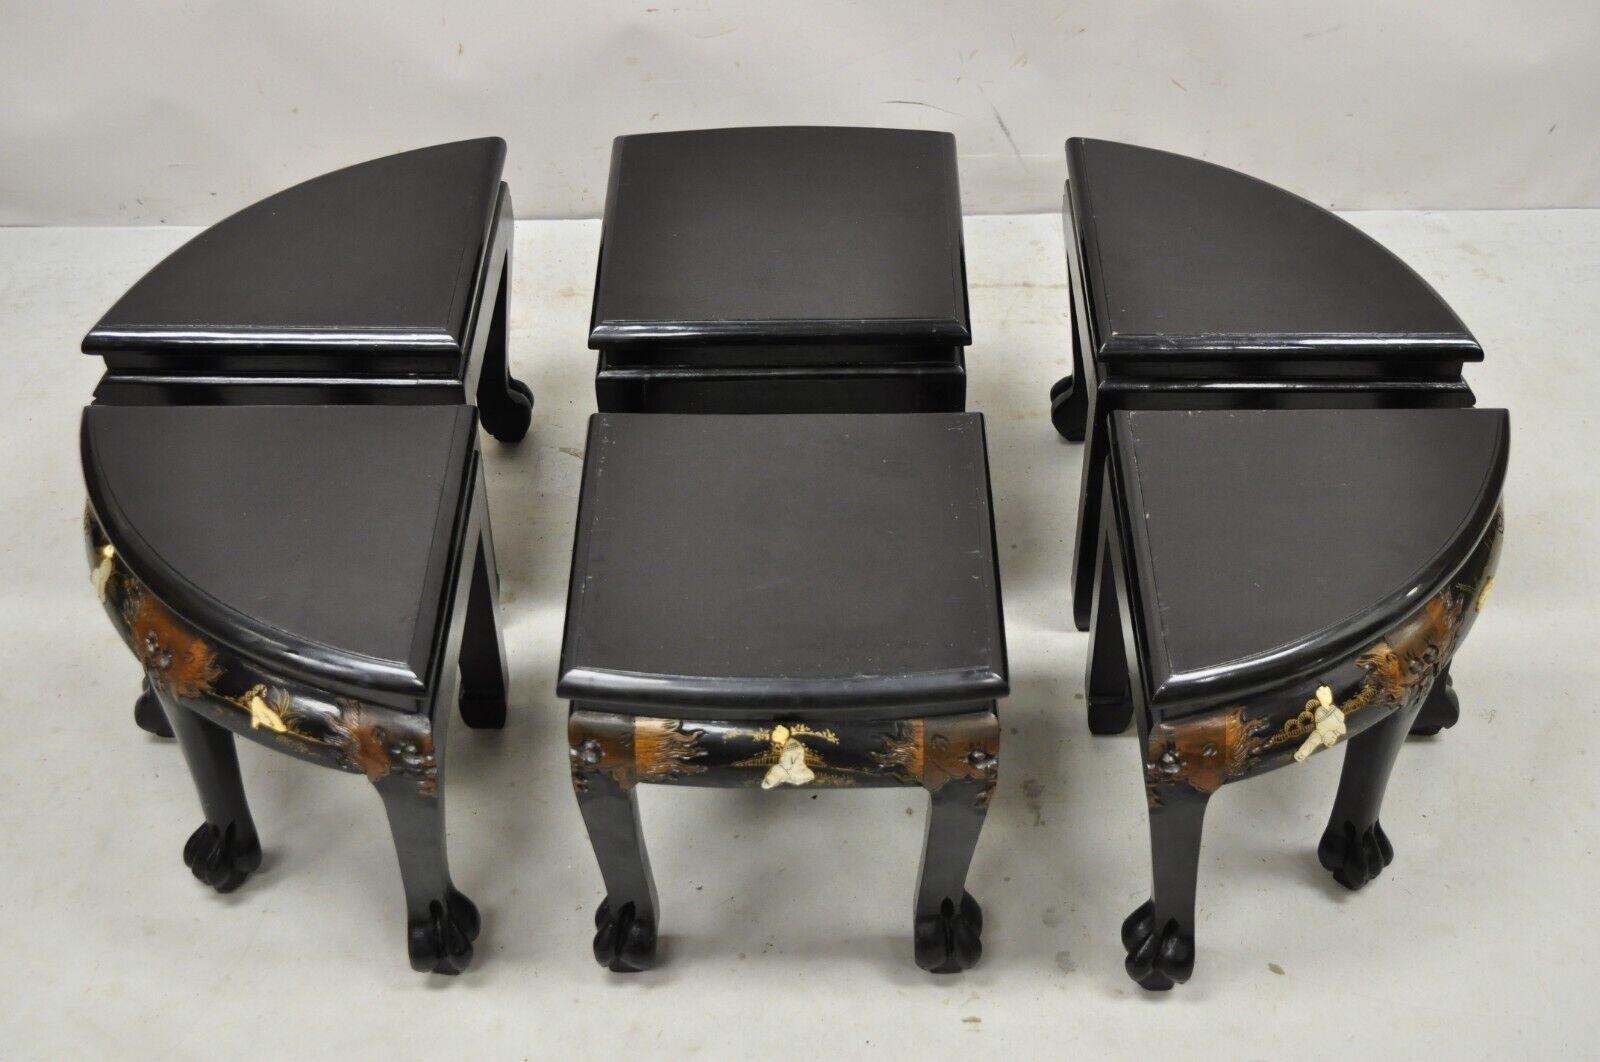 Chinese Black Lacquer Mother of Pearl Oval Nesting Coffee Table Set 6 Stools - A For Sale 6